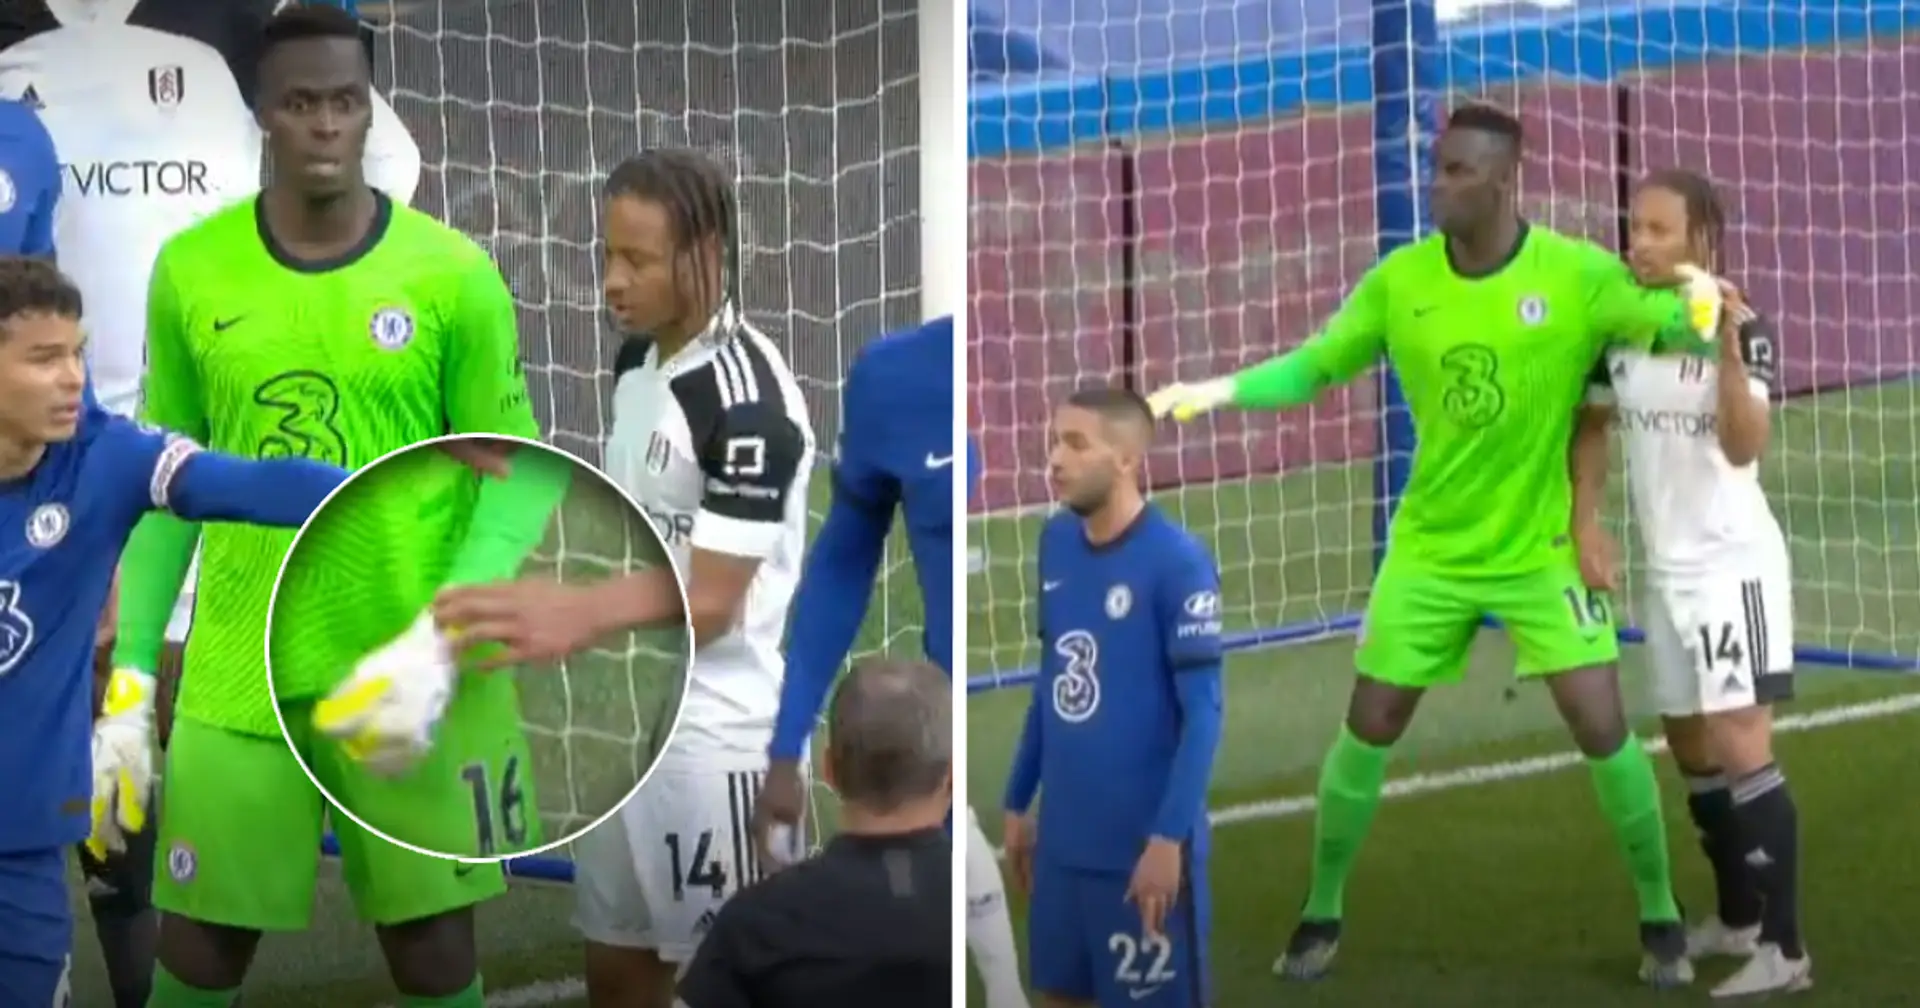 Disgraceful: Fulham forward tries to distract Mendy by undoing keeper's gloves during corner routine